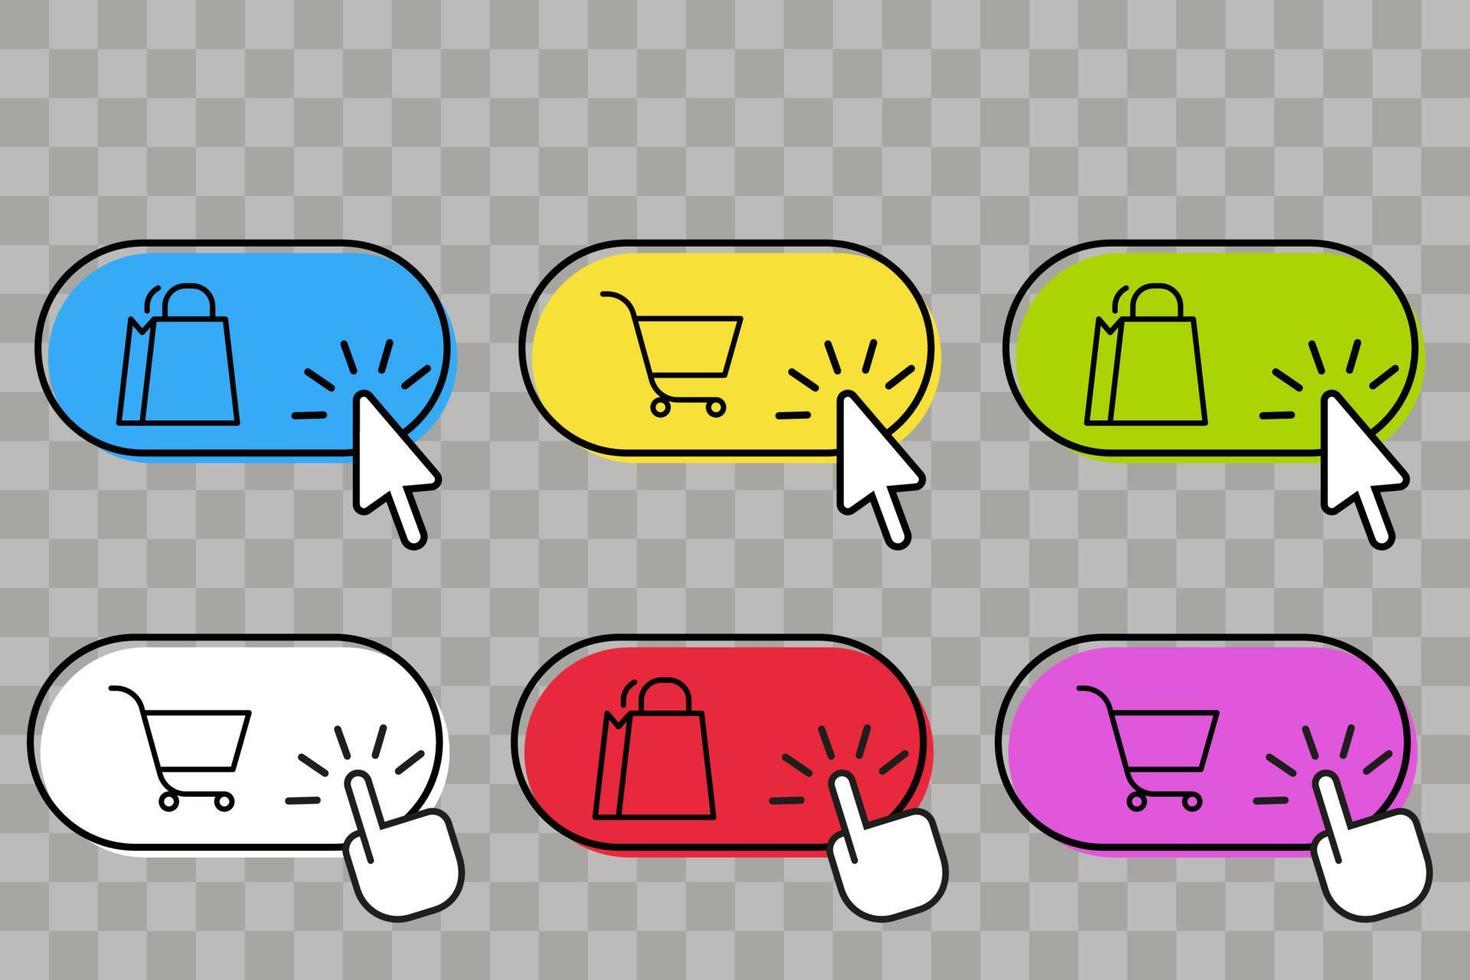 Click to buy. Online shopping, arrow cursor and hand cursor clicking. Cart and bag vector icons